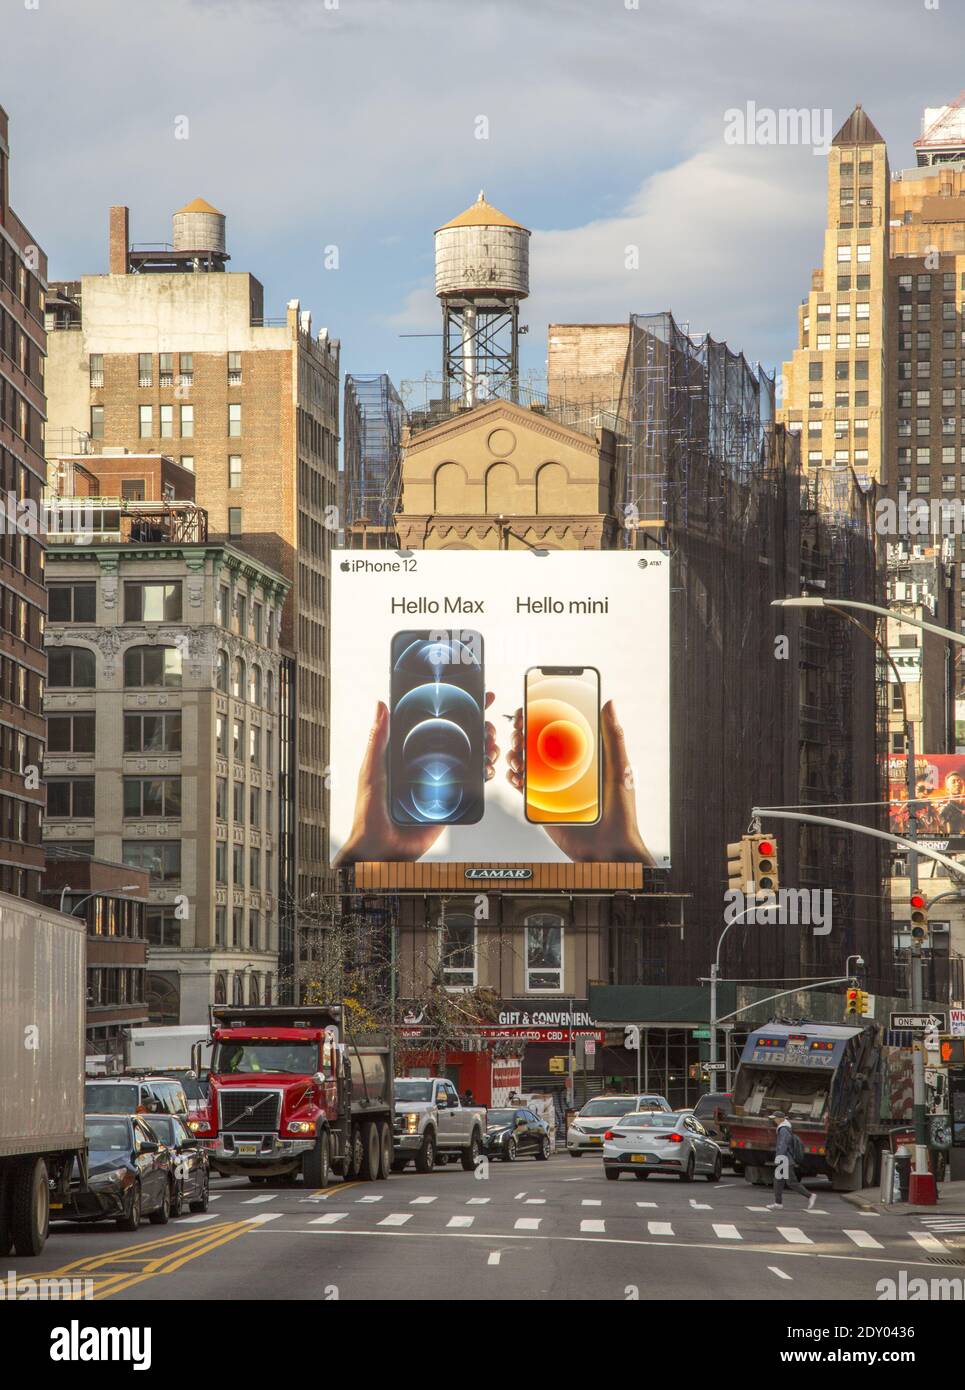 iphone billboard stands out on Canal Street in Manhattan surronded by New York rooftops, classic water towers and all. Stock Photo